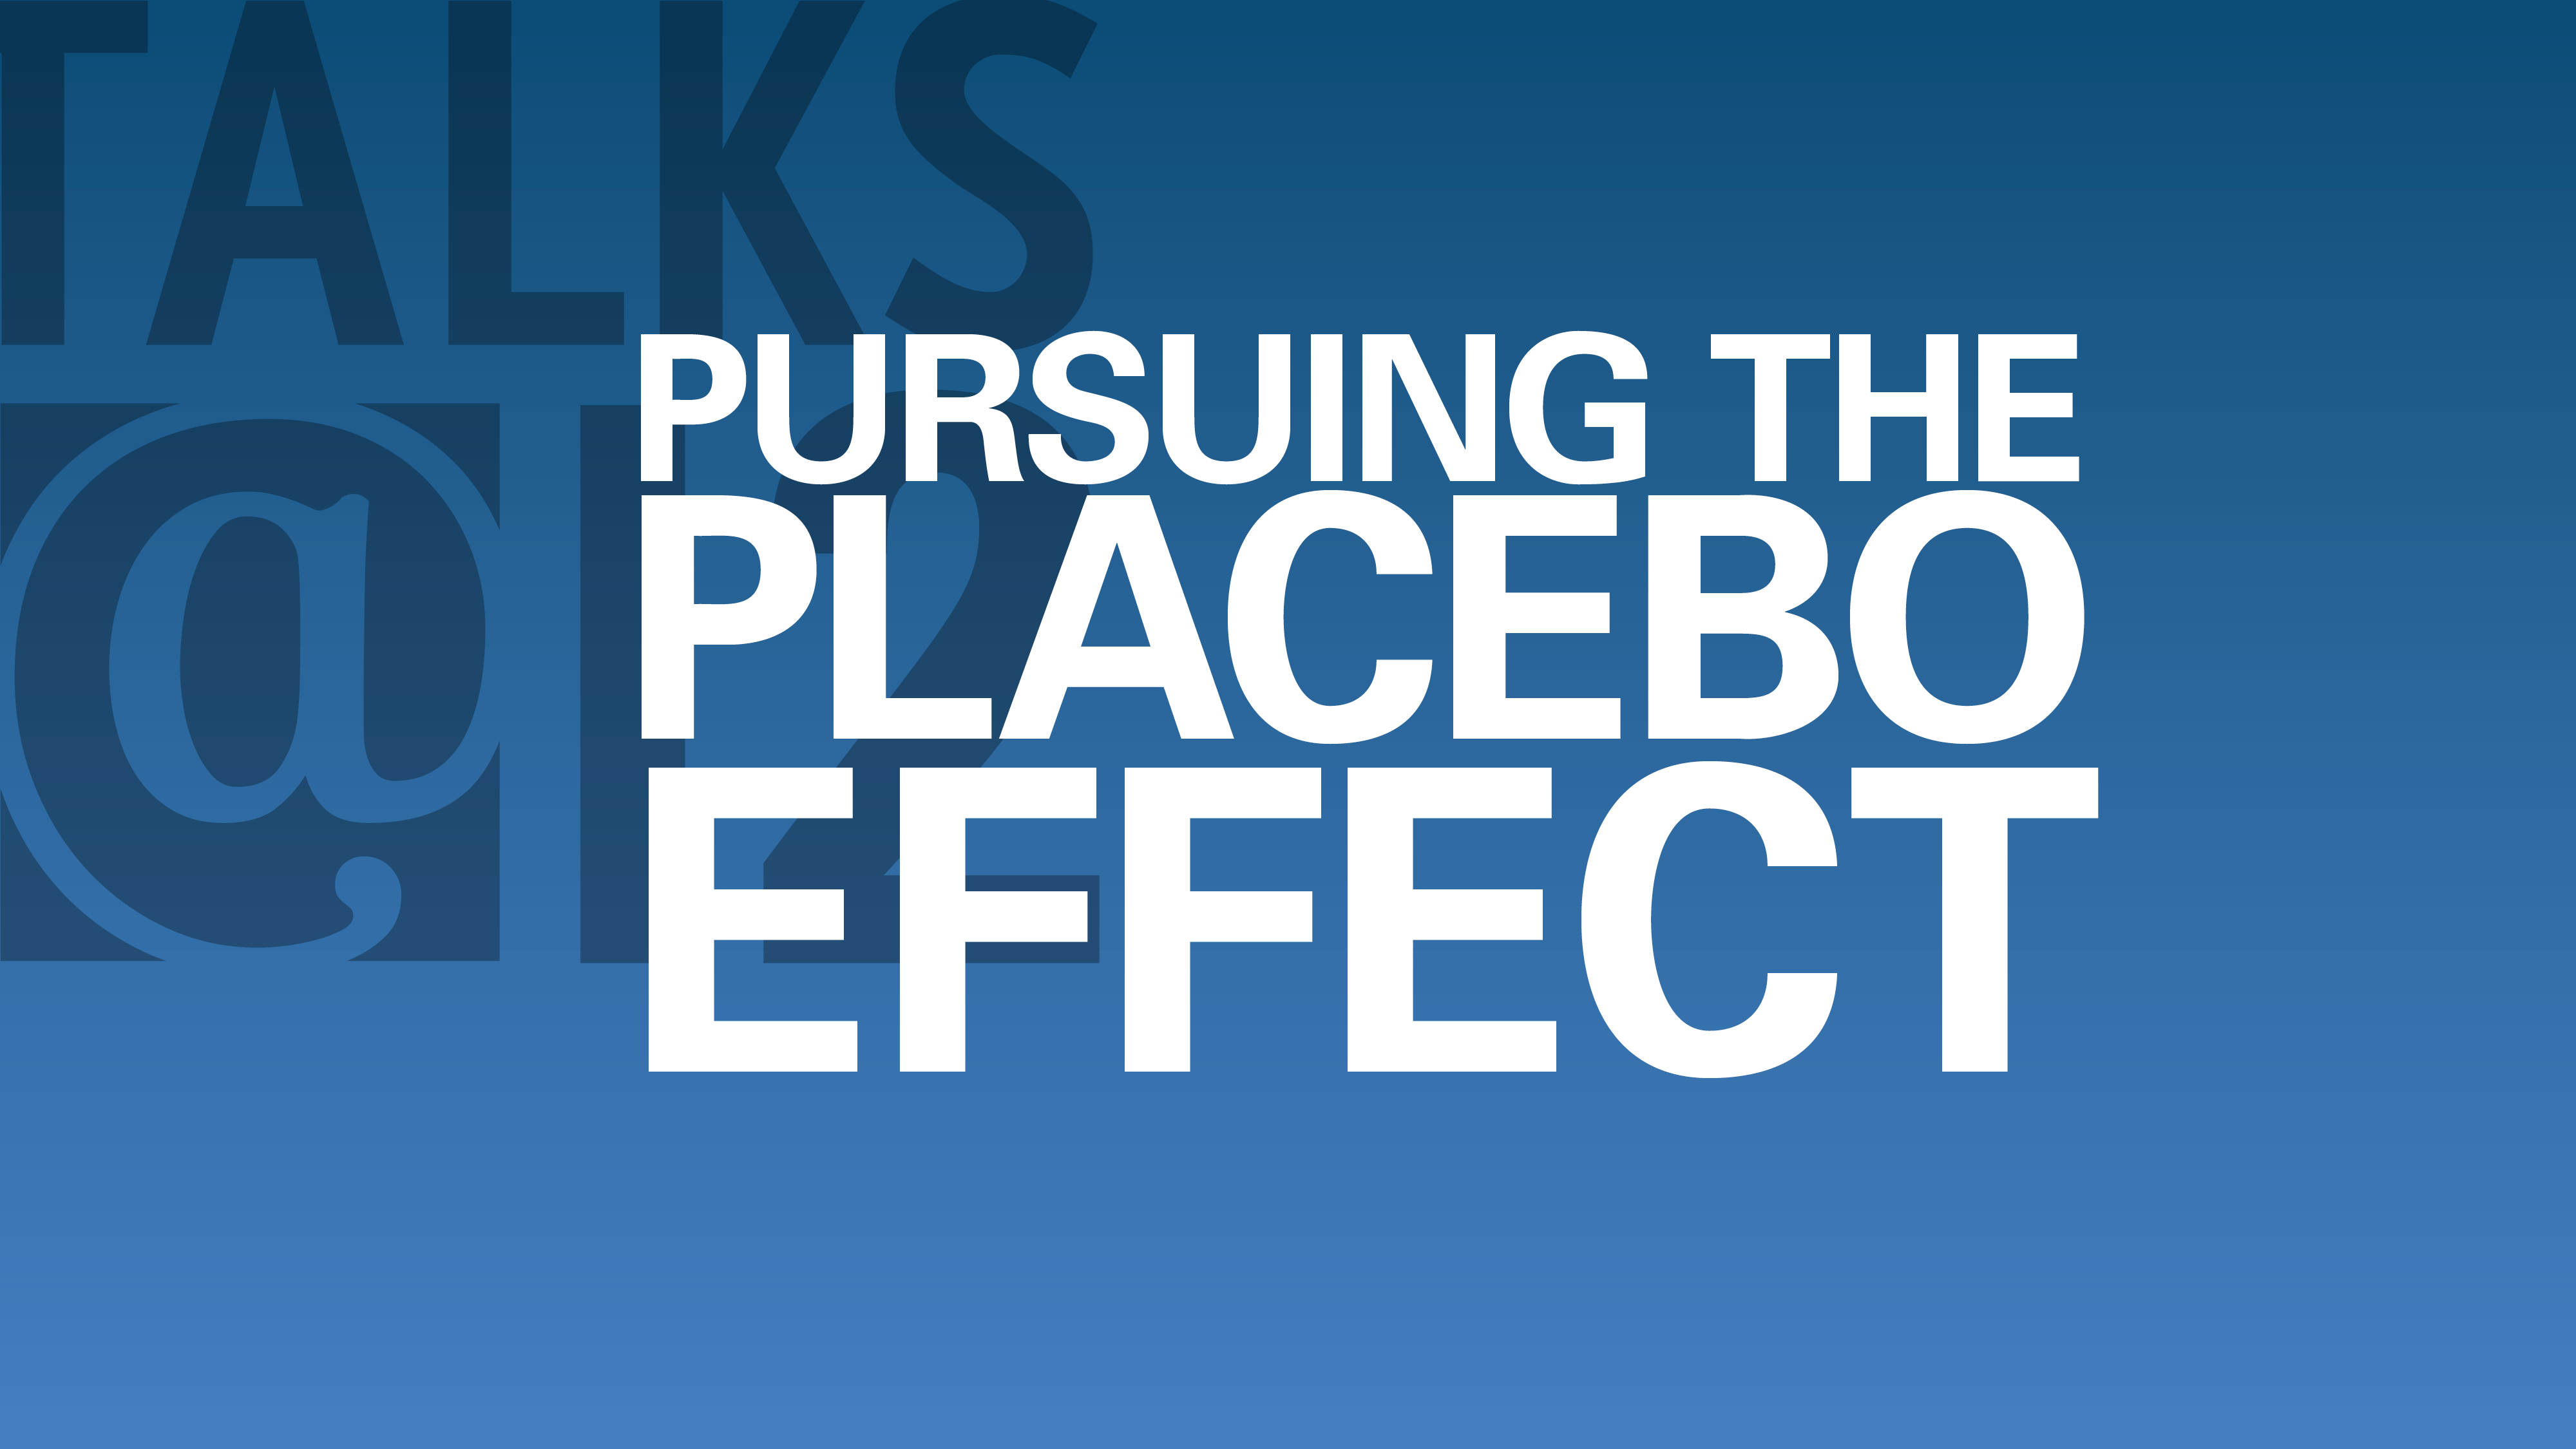 Pursuing the Placebo Effect